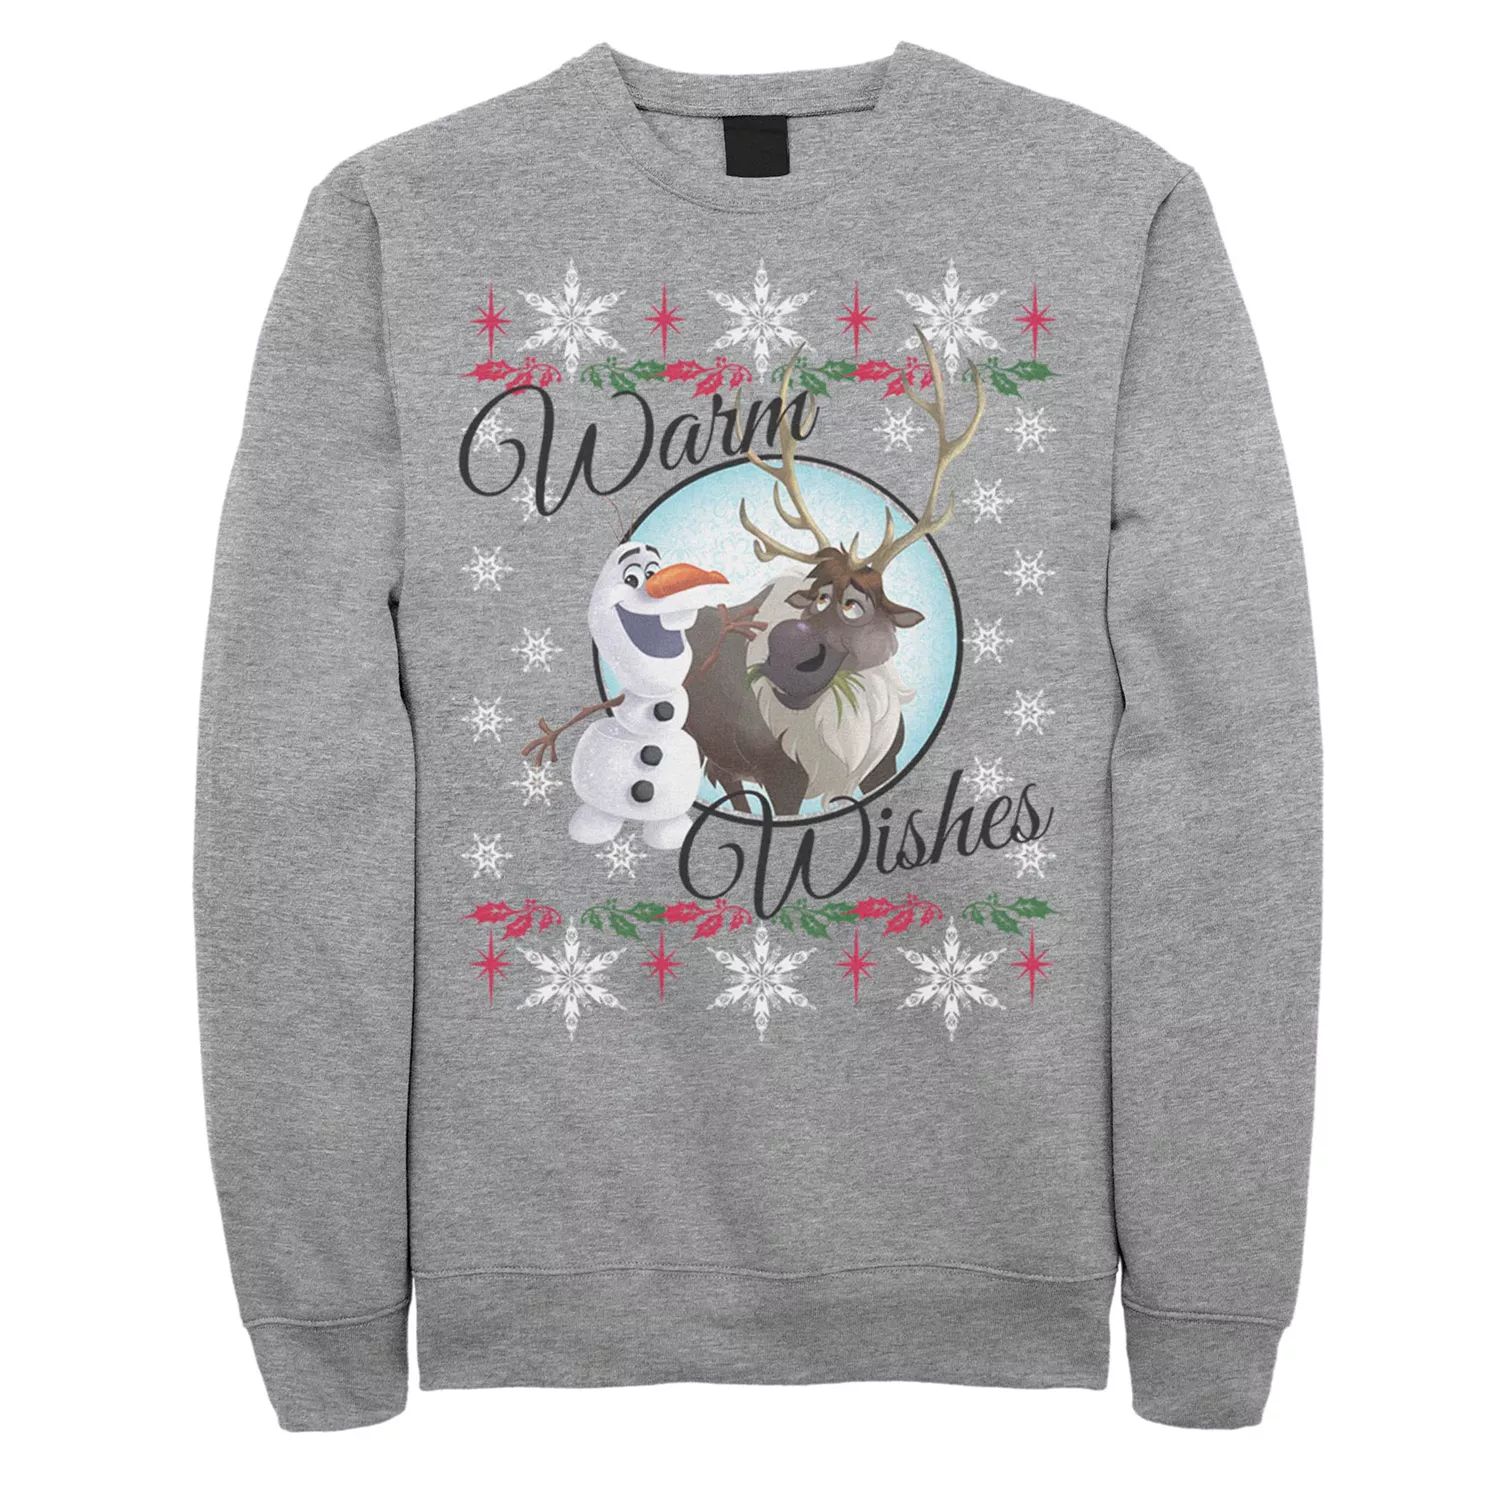 цена Юниоры Frozen Olaf Sven Флис Warm Wishes Licensed Character